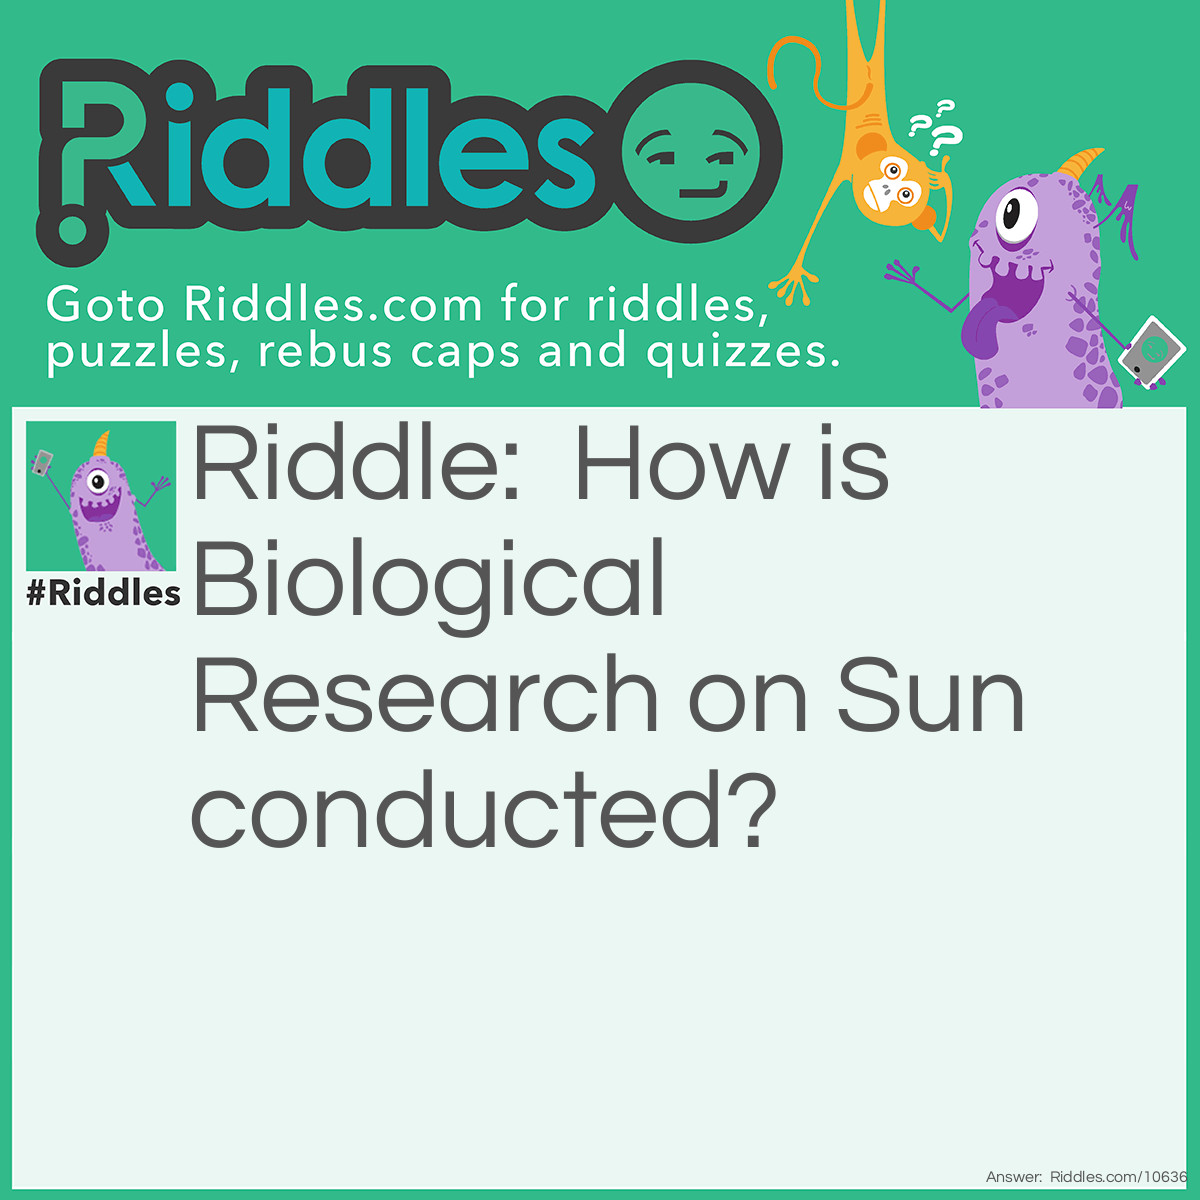 Riddle: How is Biological Research on Sun conducted? Answer: With help of Solar-Cells.